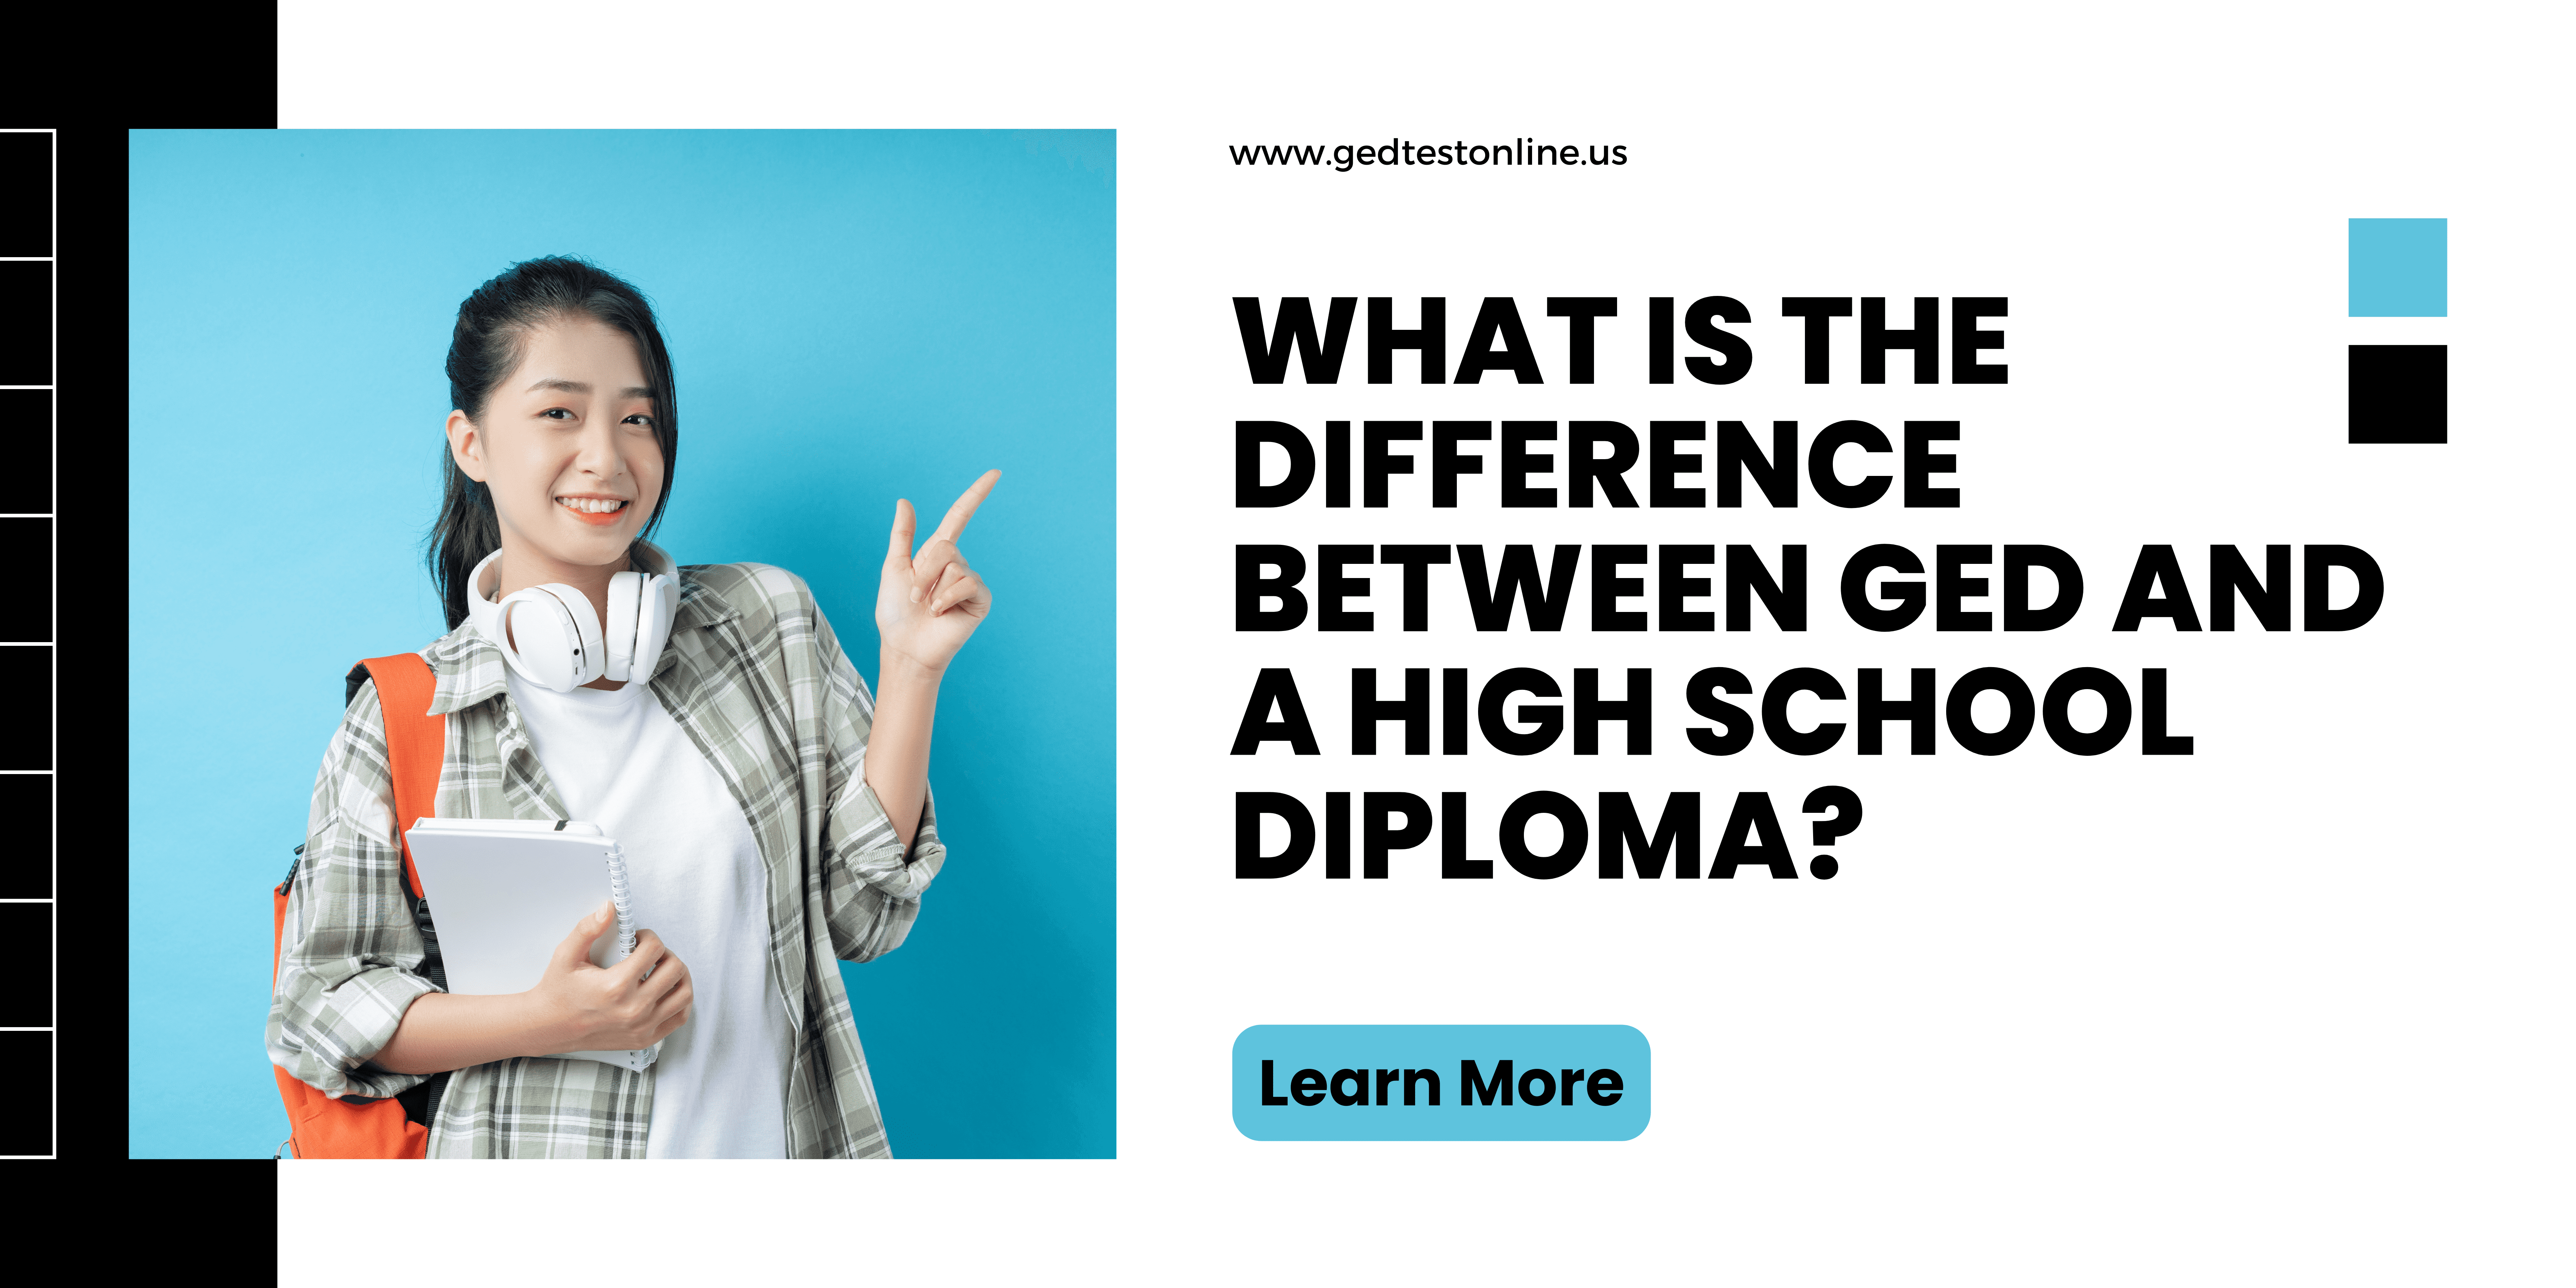 What is the Difference between GED and a High School Diploma?